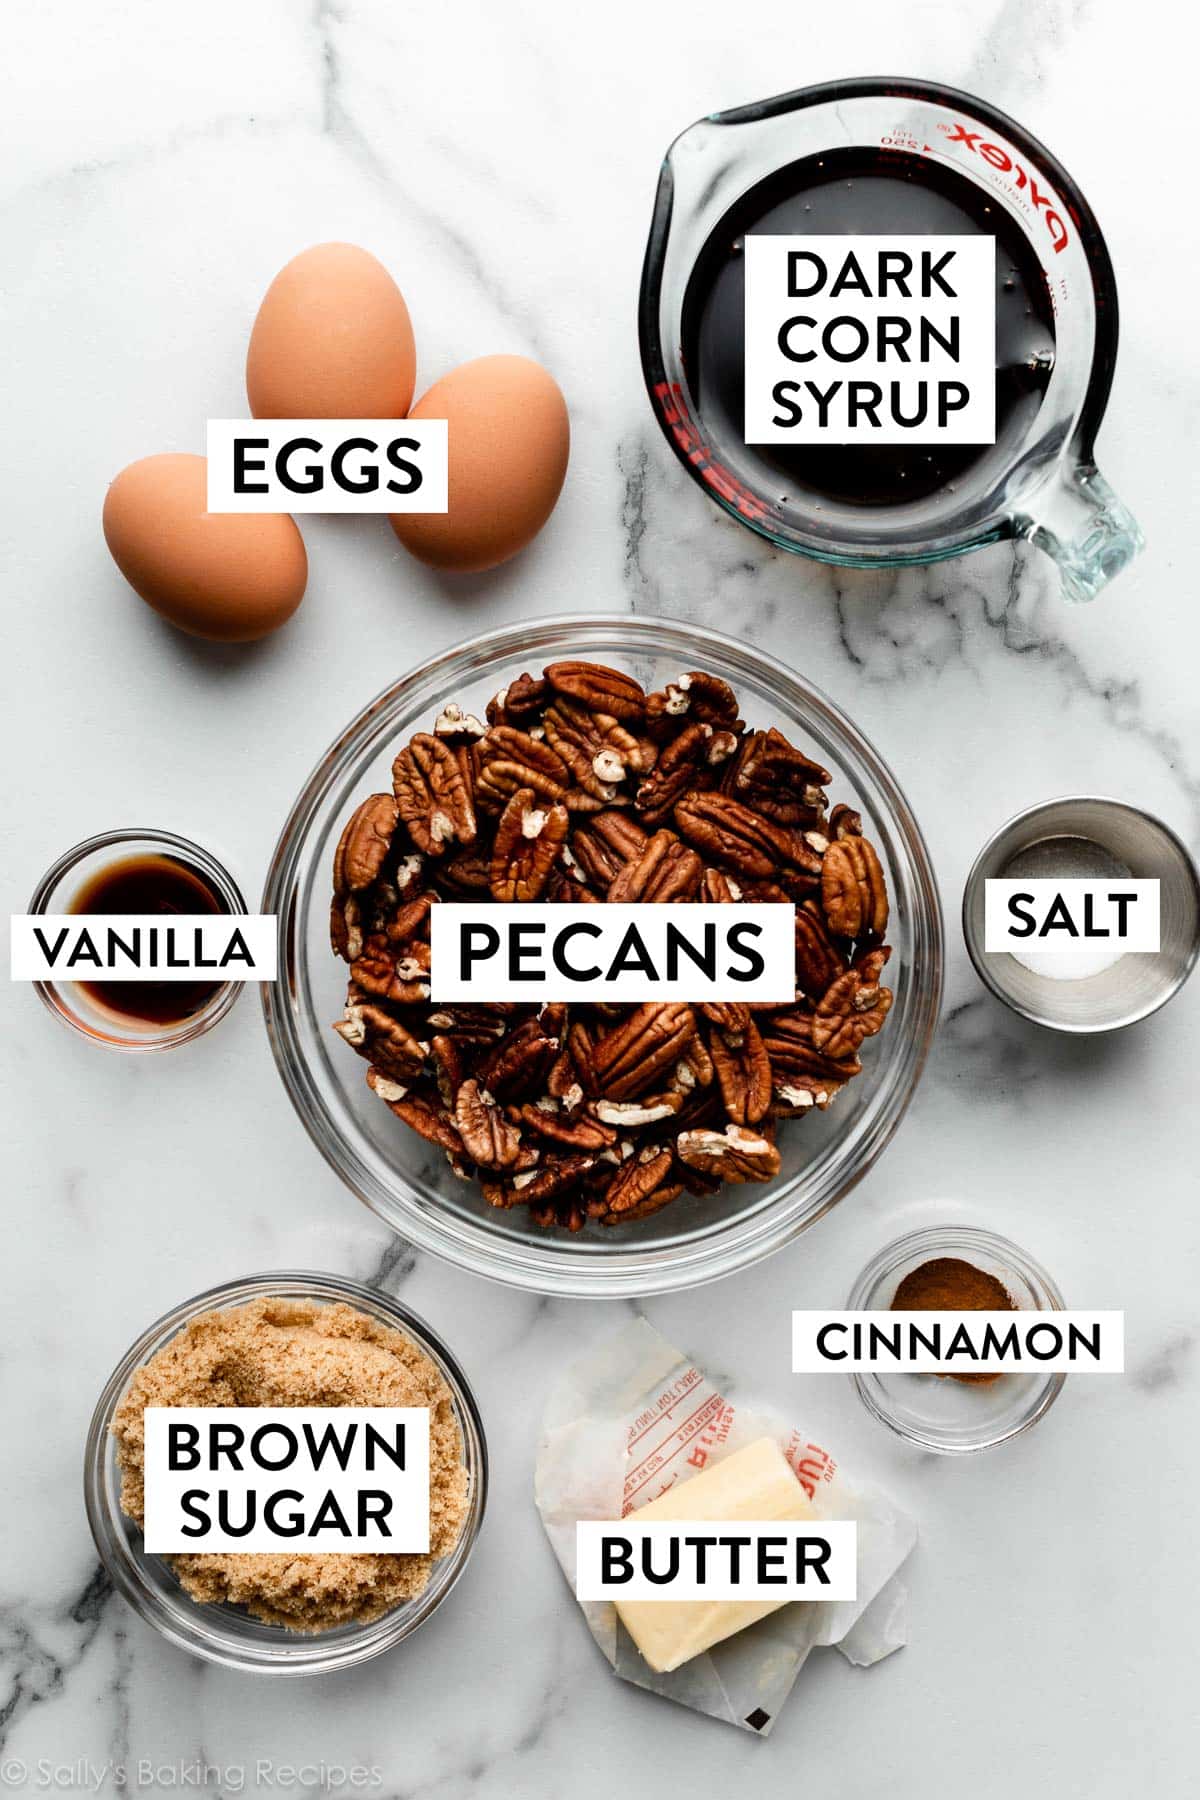 measured ingredients on marble counter including dark corn syrup, eggs, pecans, brown sugar, and butter.